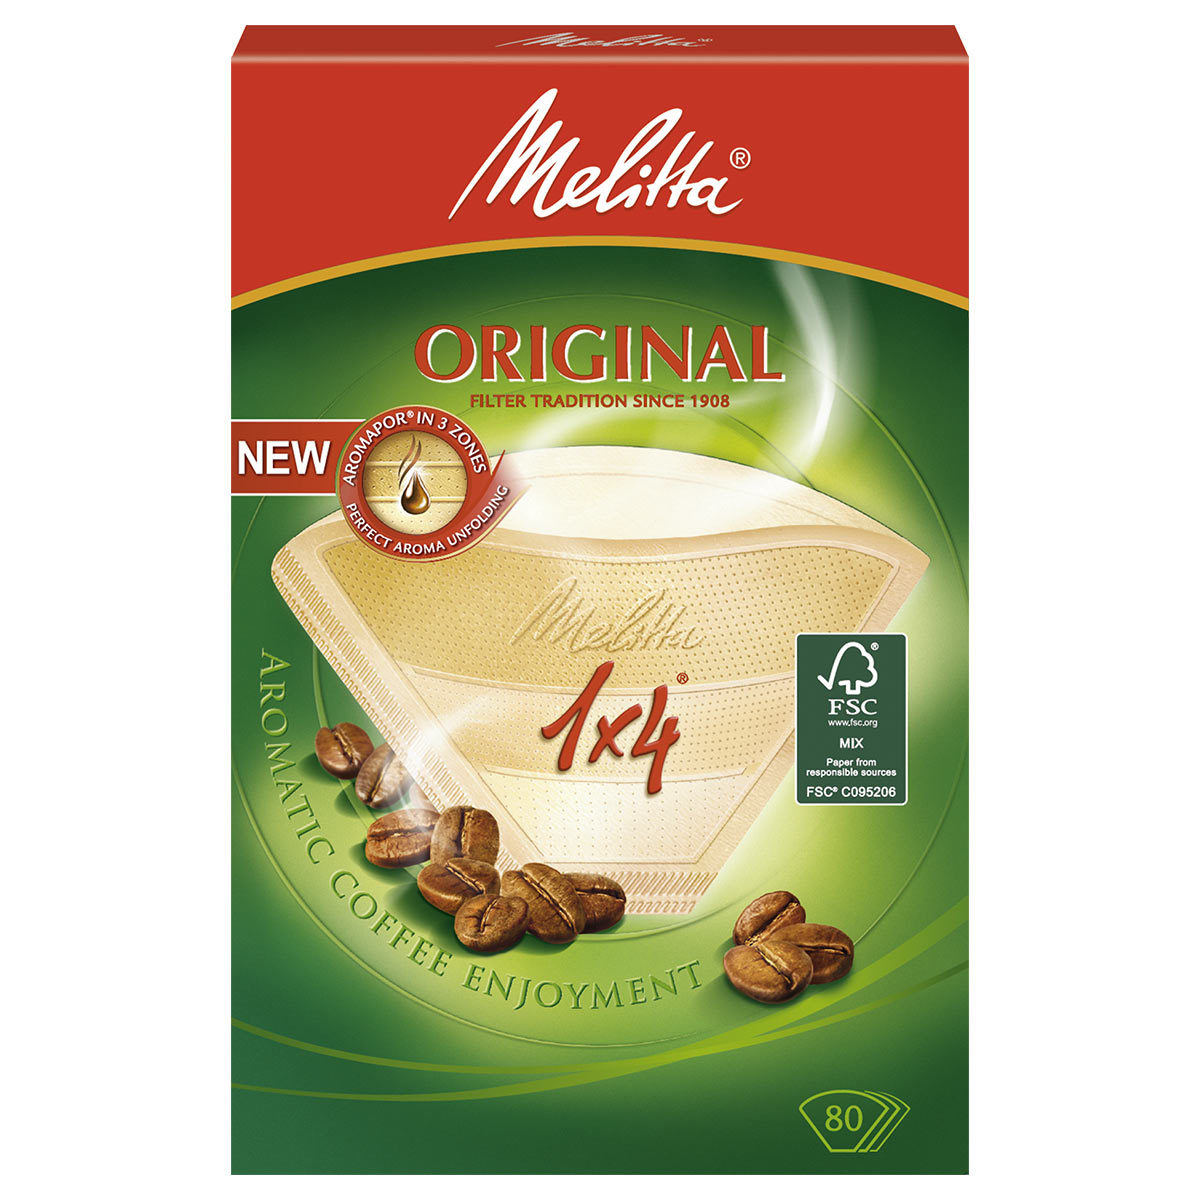 Melitta Original Coffee Filter Papers Size 1x4, 18 x 80 Filters